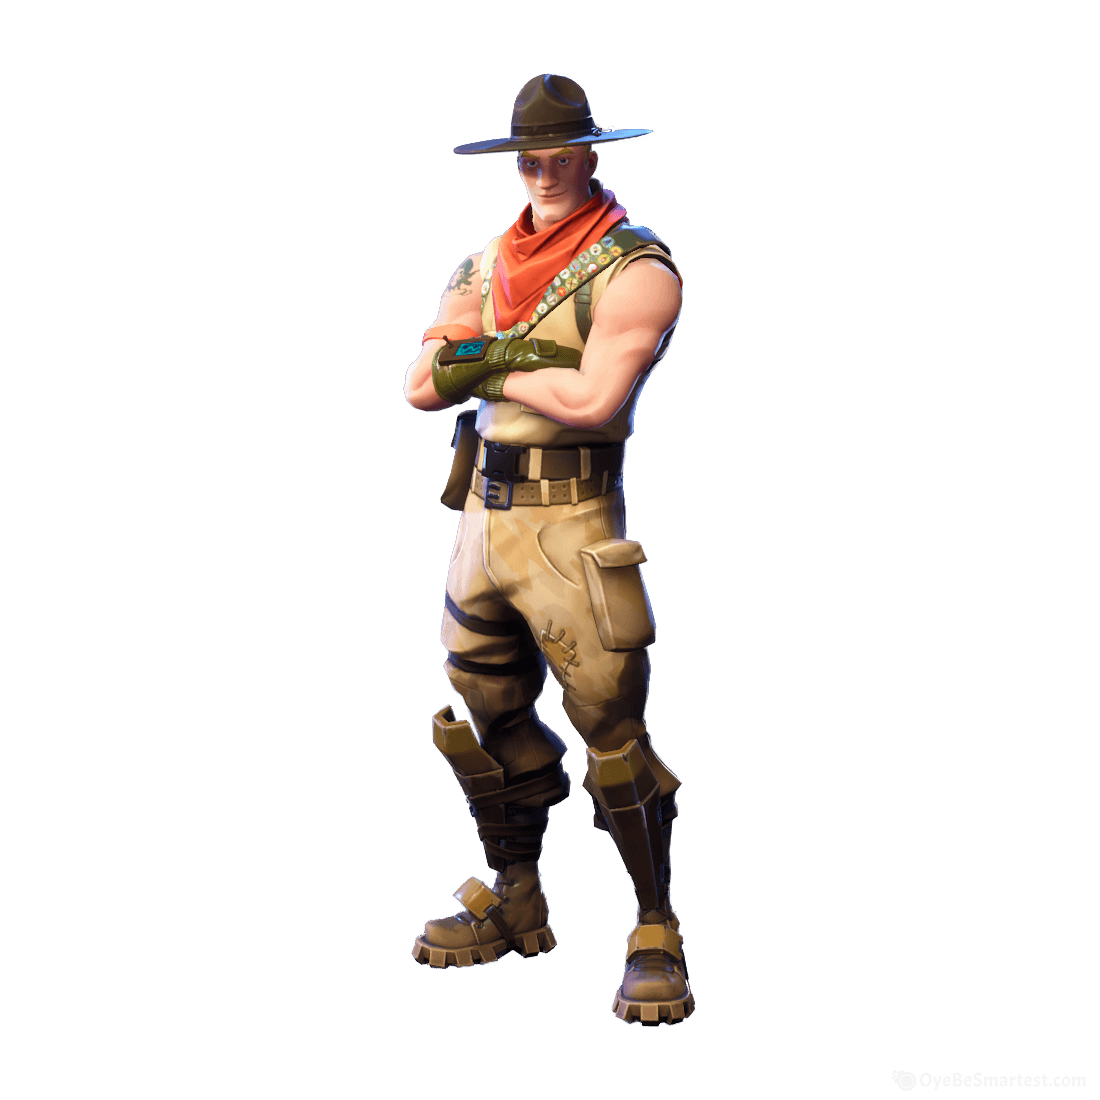 Swing Sargeant Fortnite Wallpapers